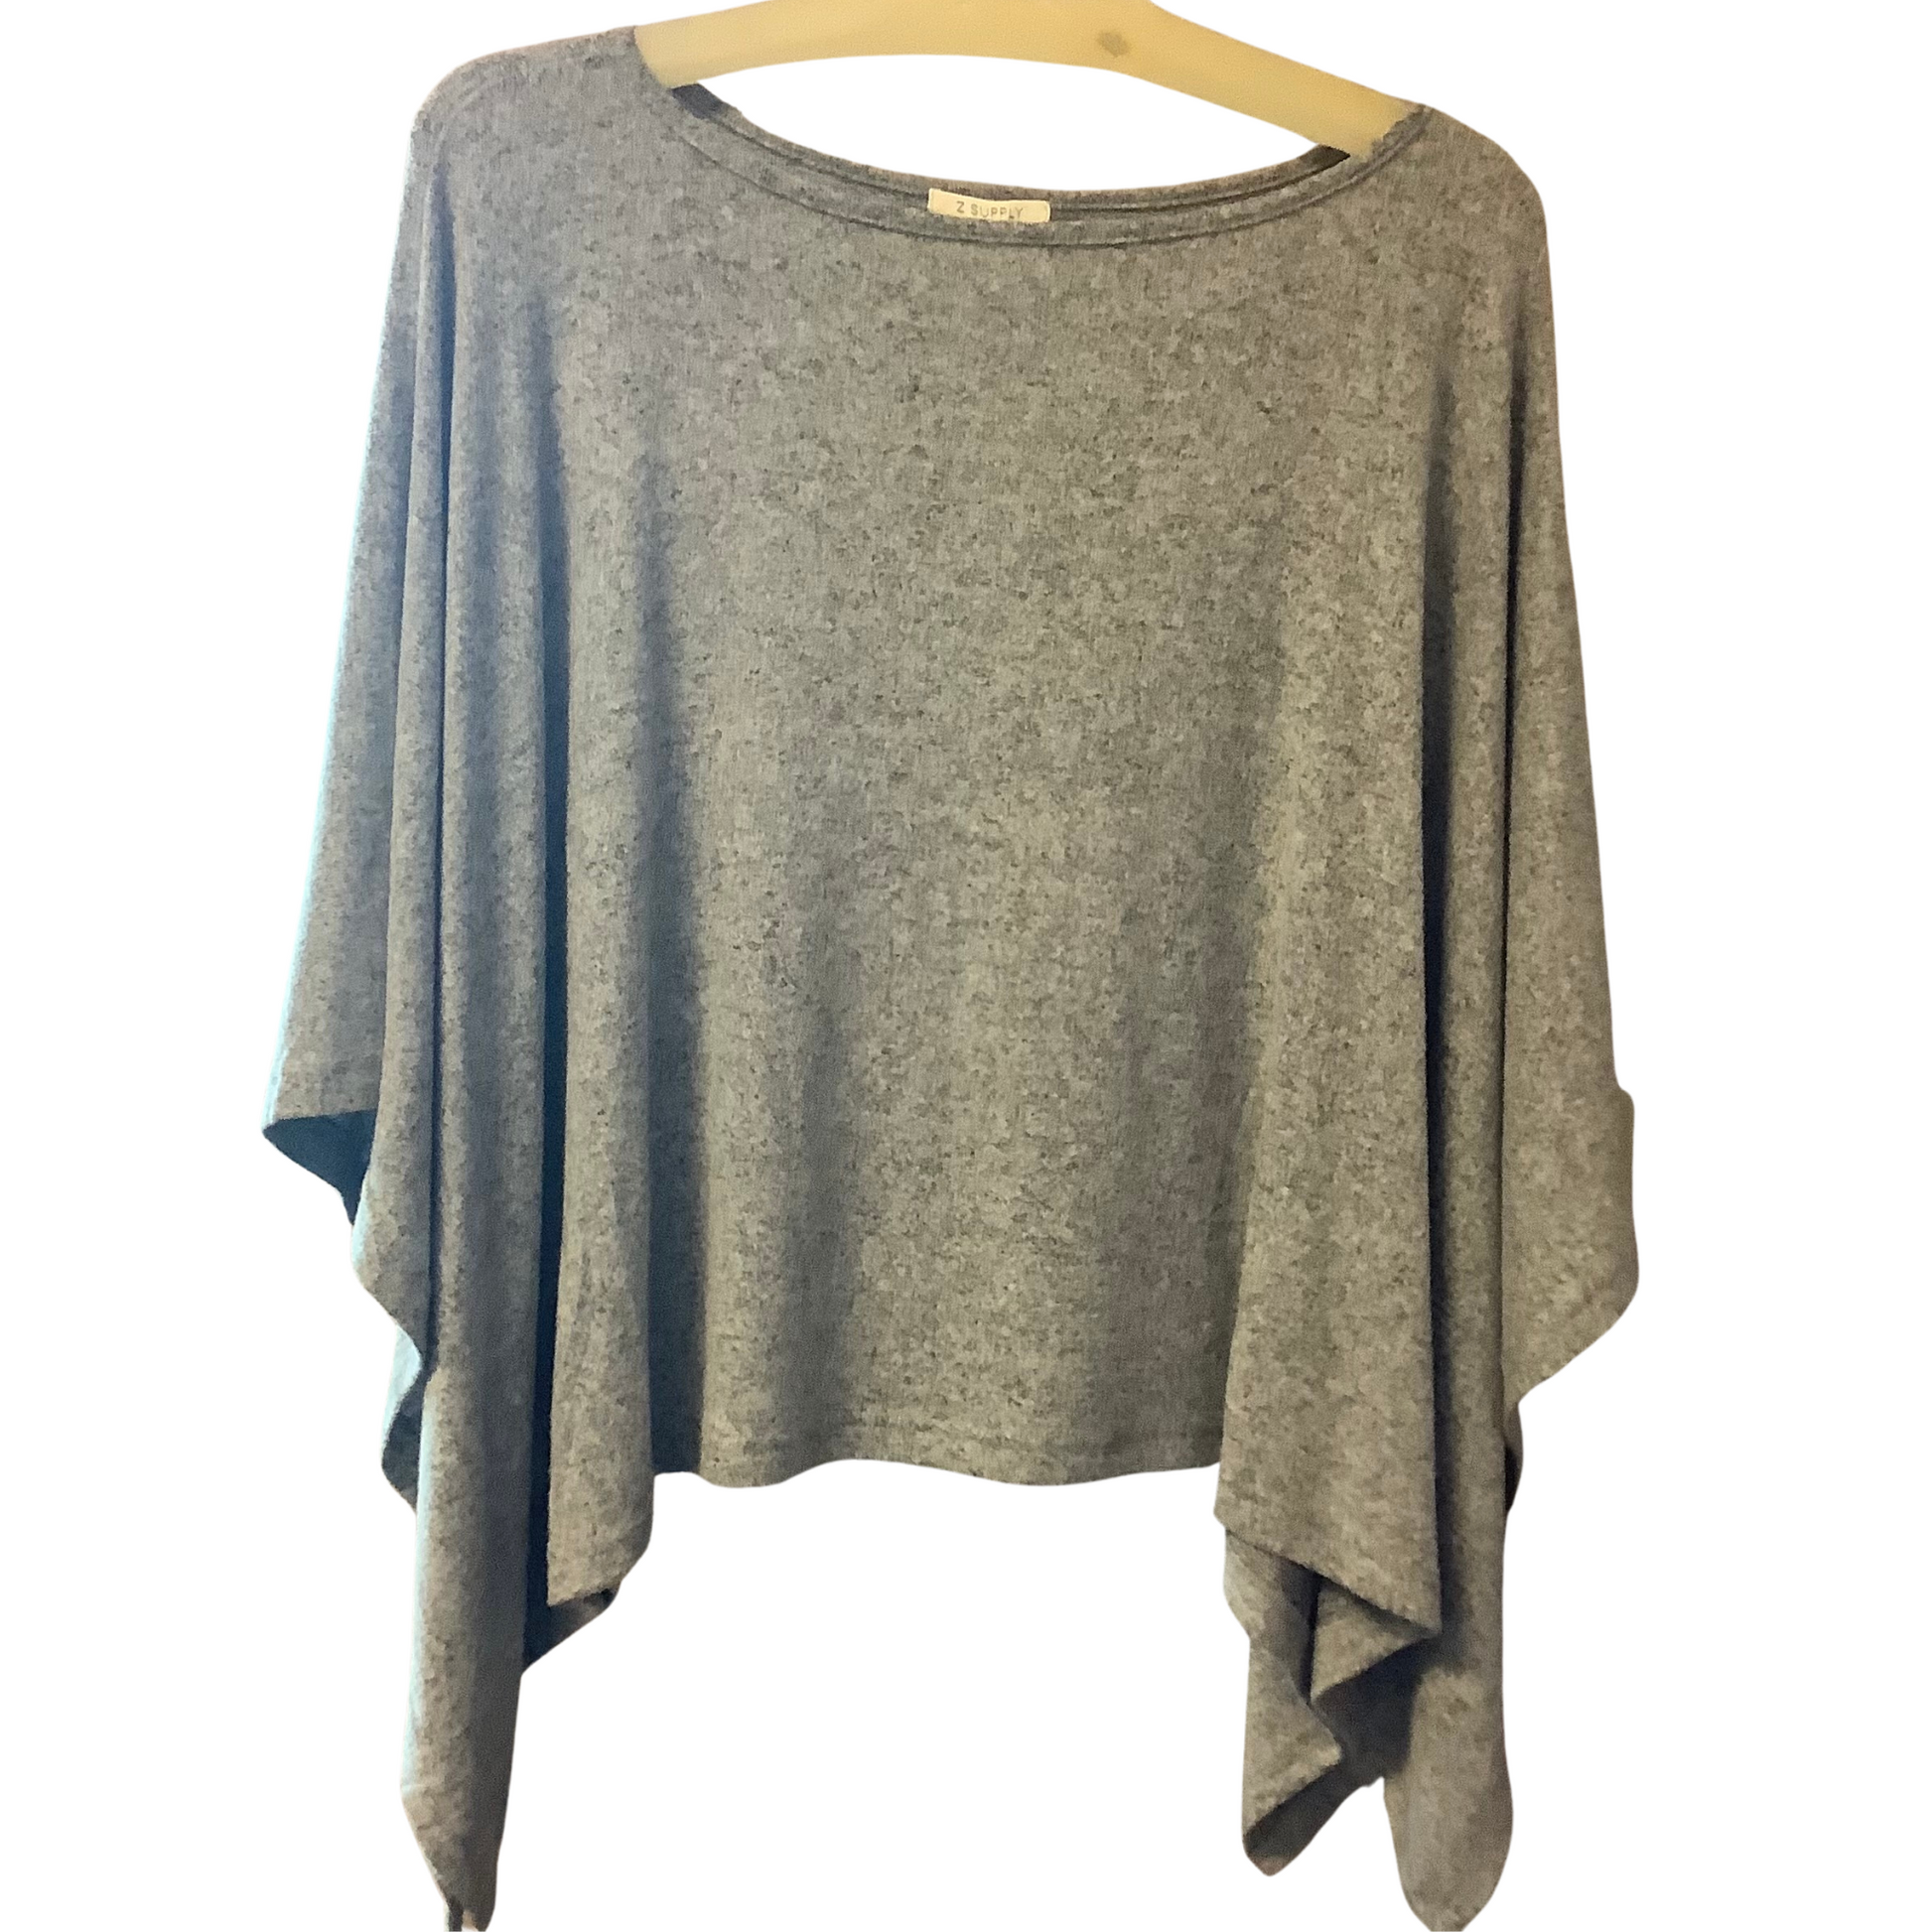 <p>This Soft Poncho is a must-have wardrobe staple, crafted from a breathable, lightweight fabric in a timeless grey hue. Perfect for any season, it allows you to add a layer of comfort without bulk.</p> <p>&nbsp;</p>